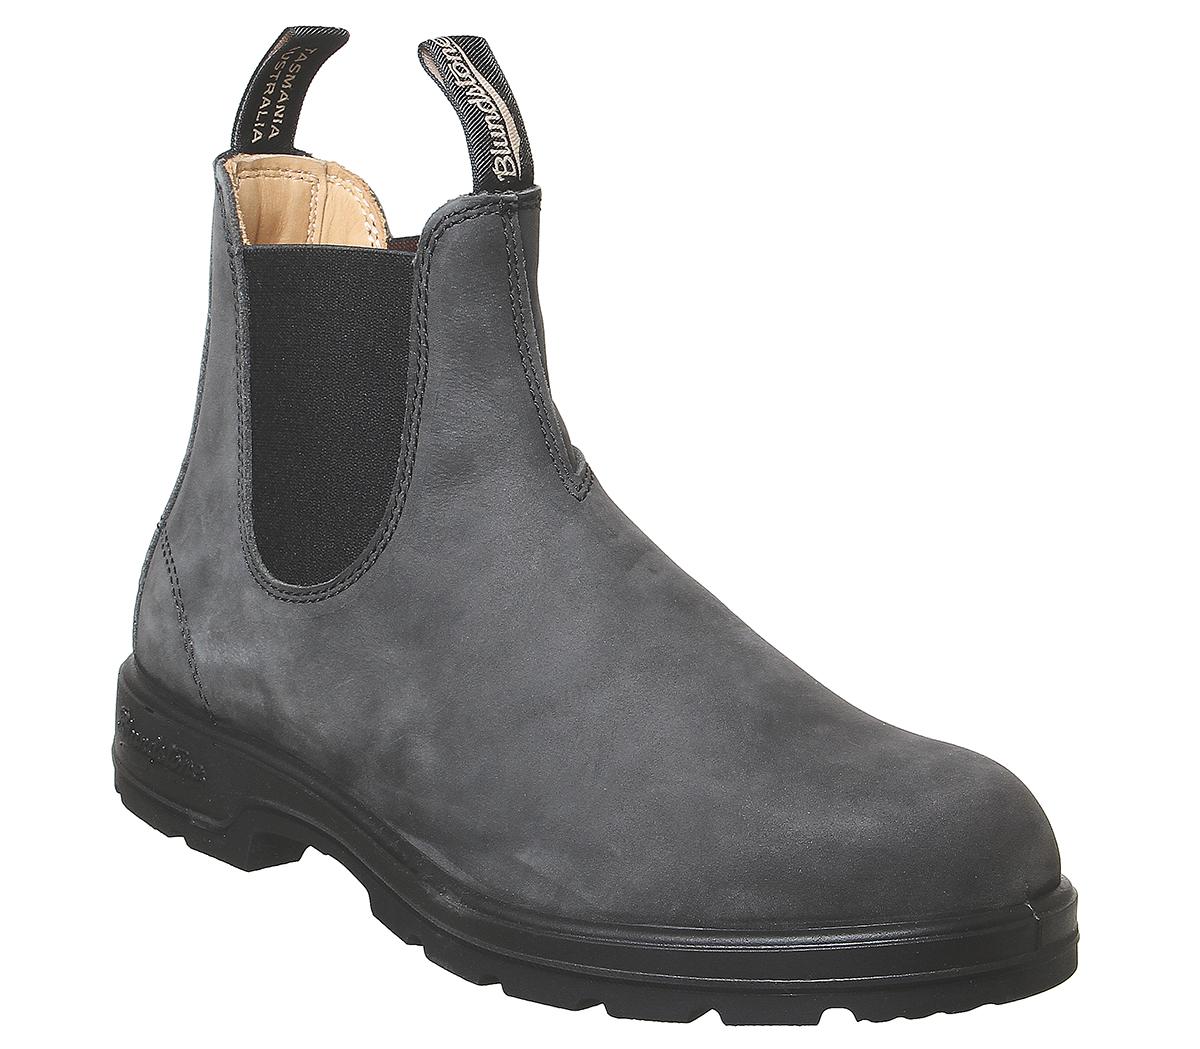 blundstone boots 587